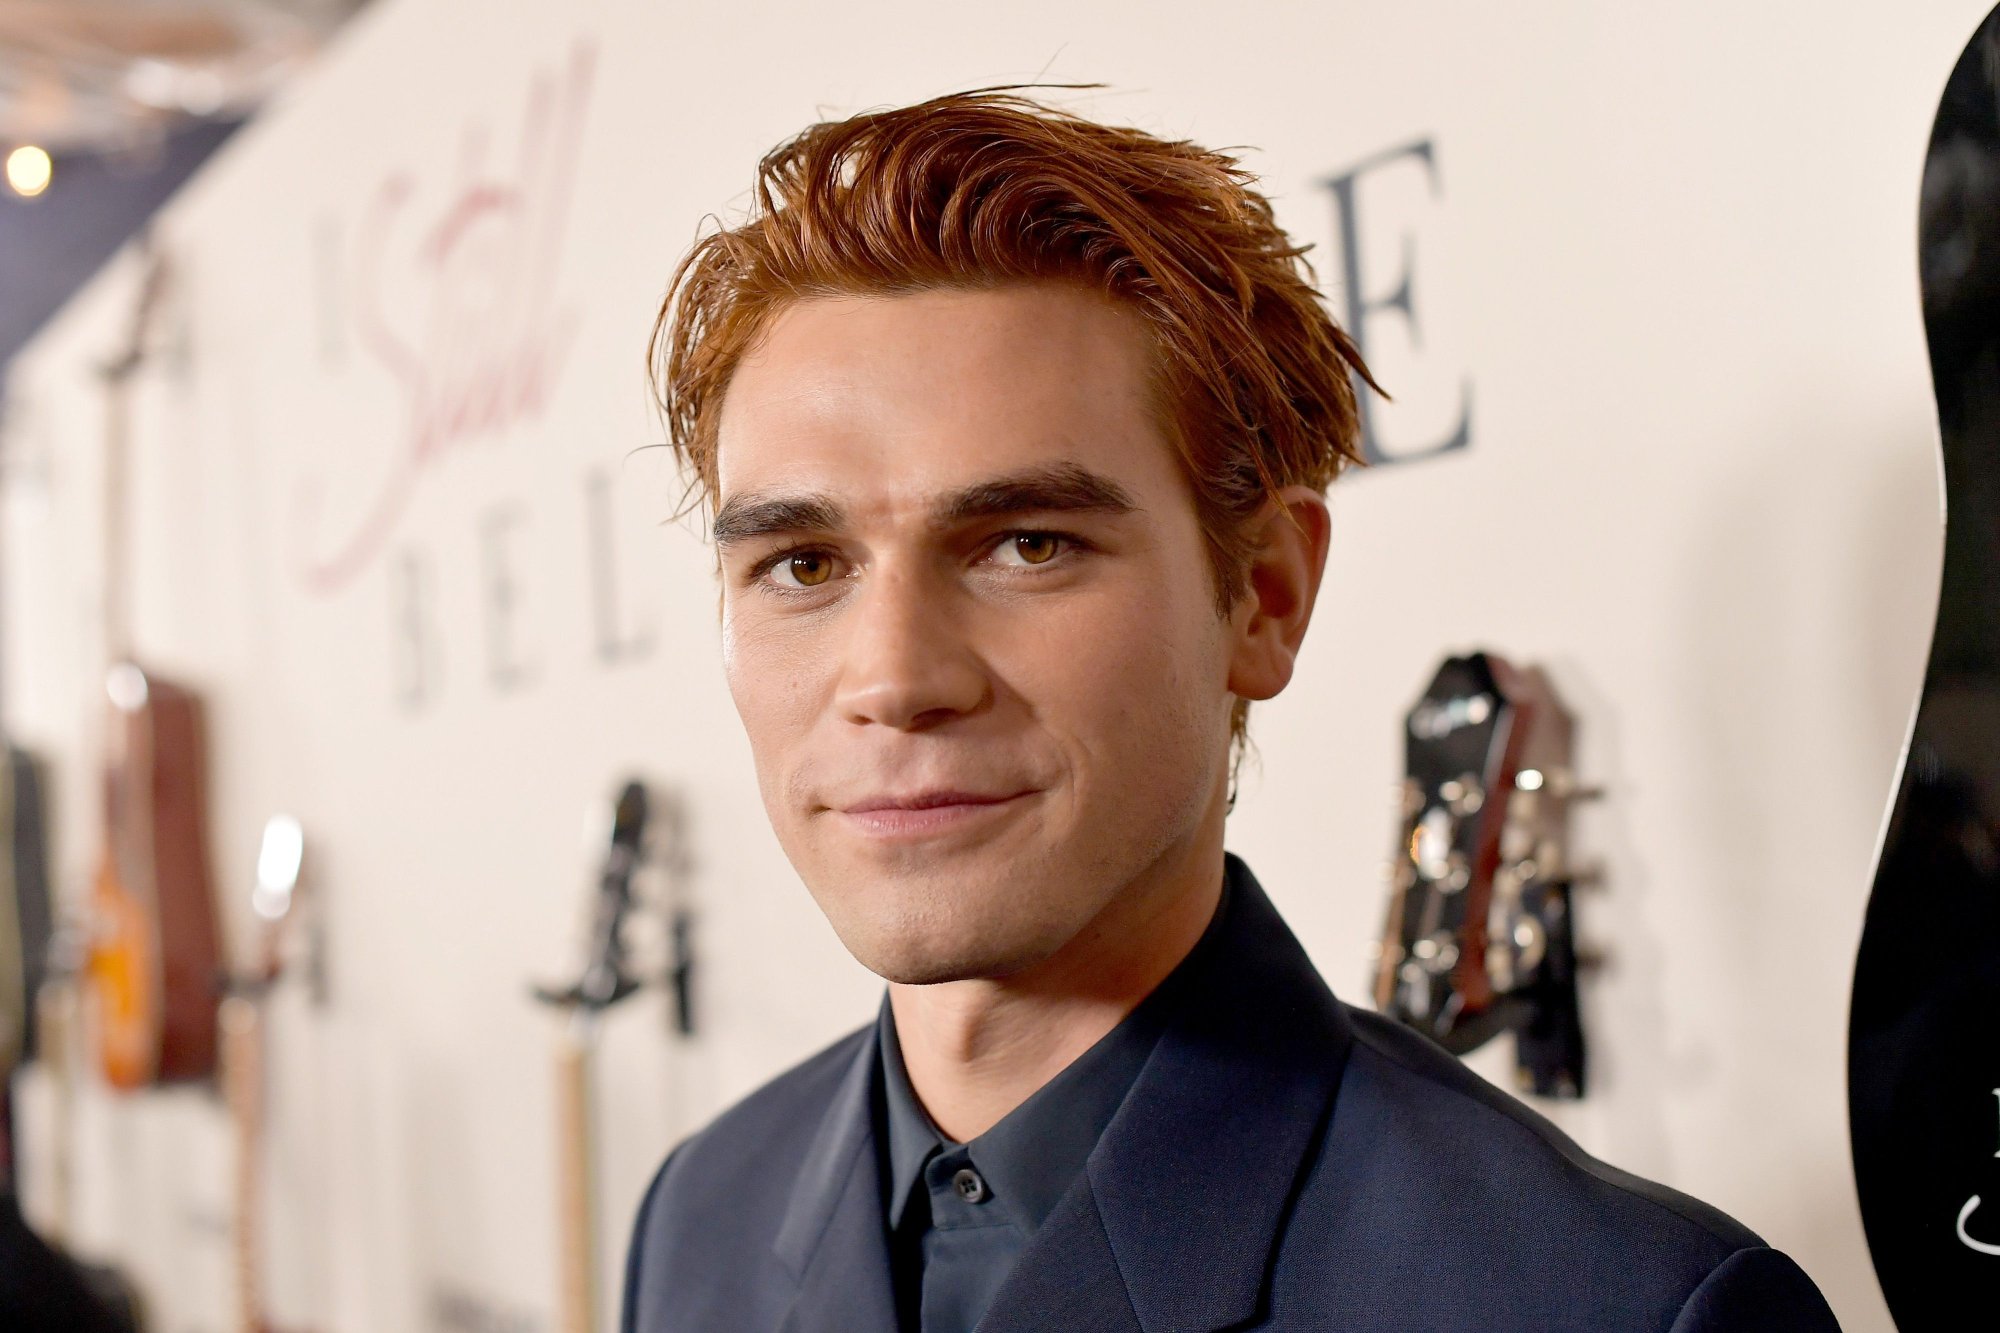 'Riverdale' star KJ Apa wants to star on 'RuPaul's Drag Race' on a step and repeat